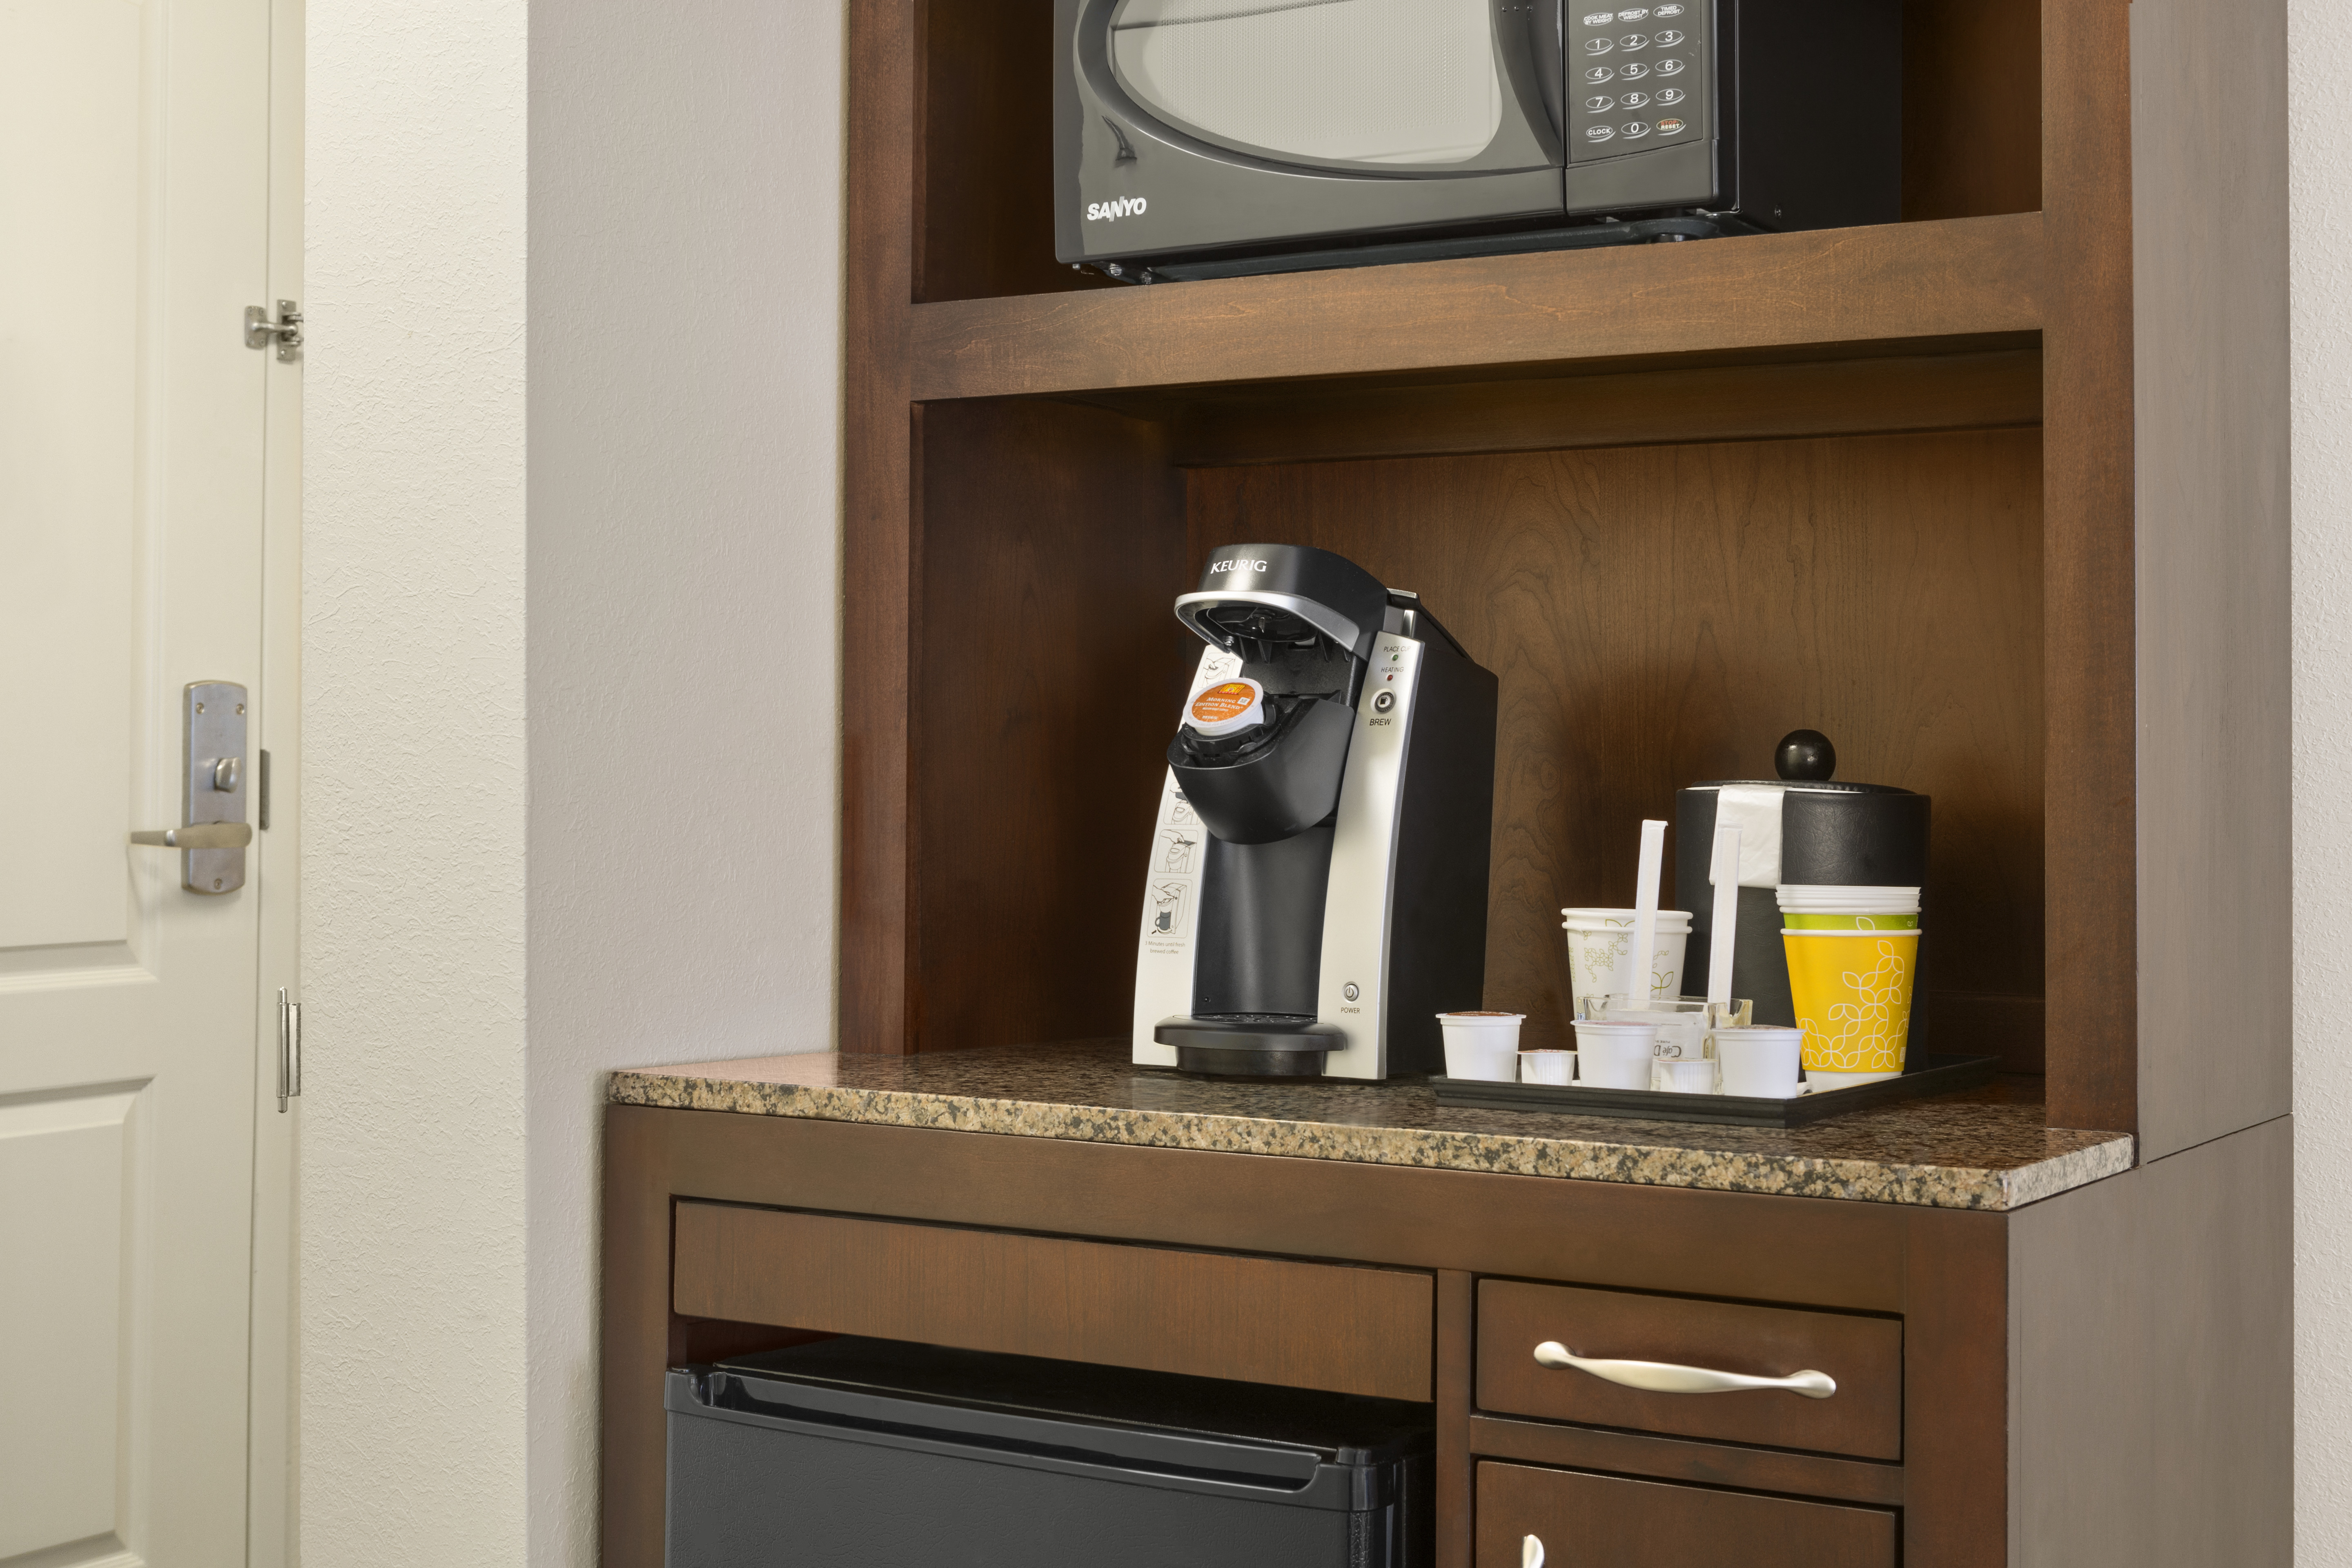 Hospitality Center With Microwave, Mini-Fridge, and Keurig by Entry